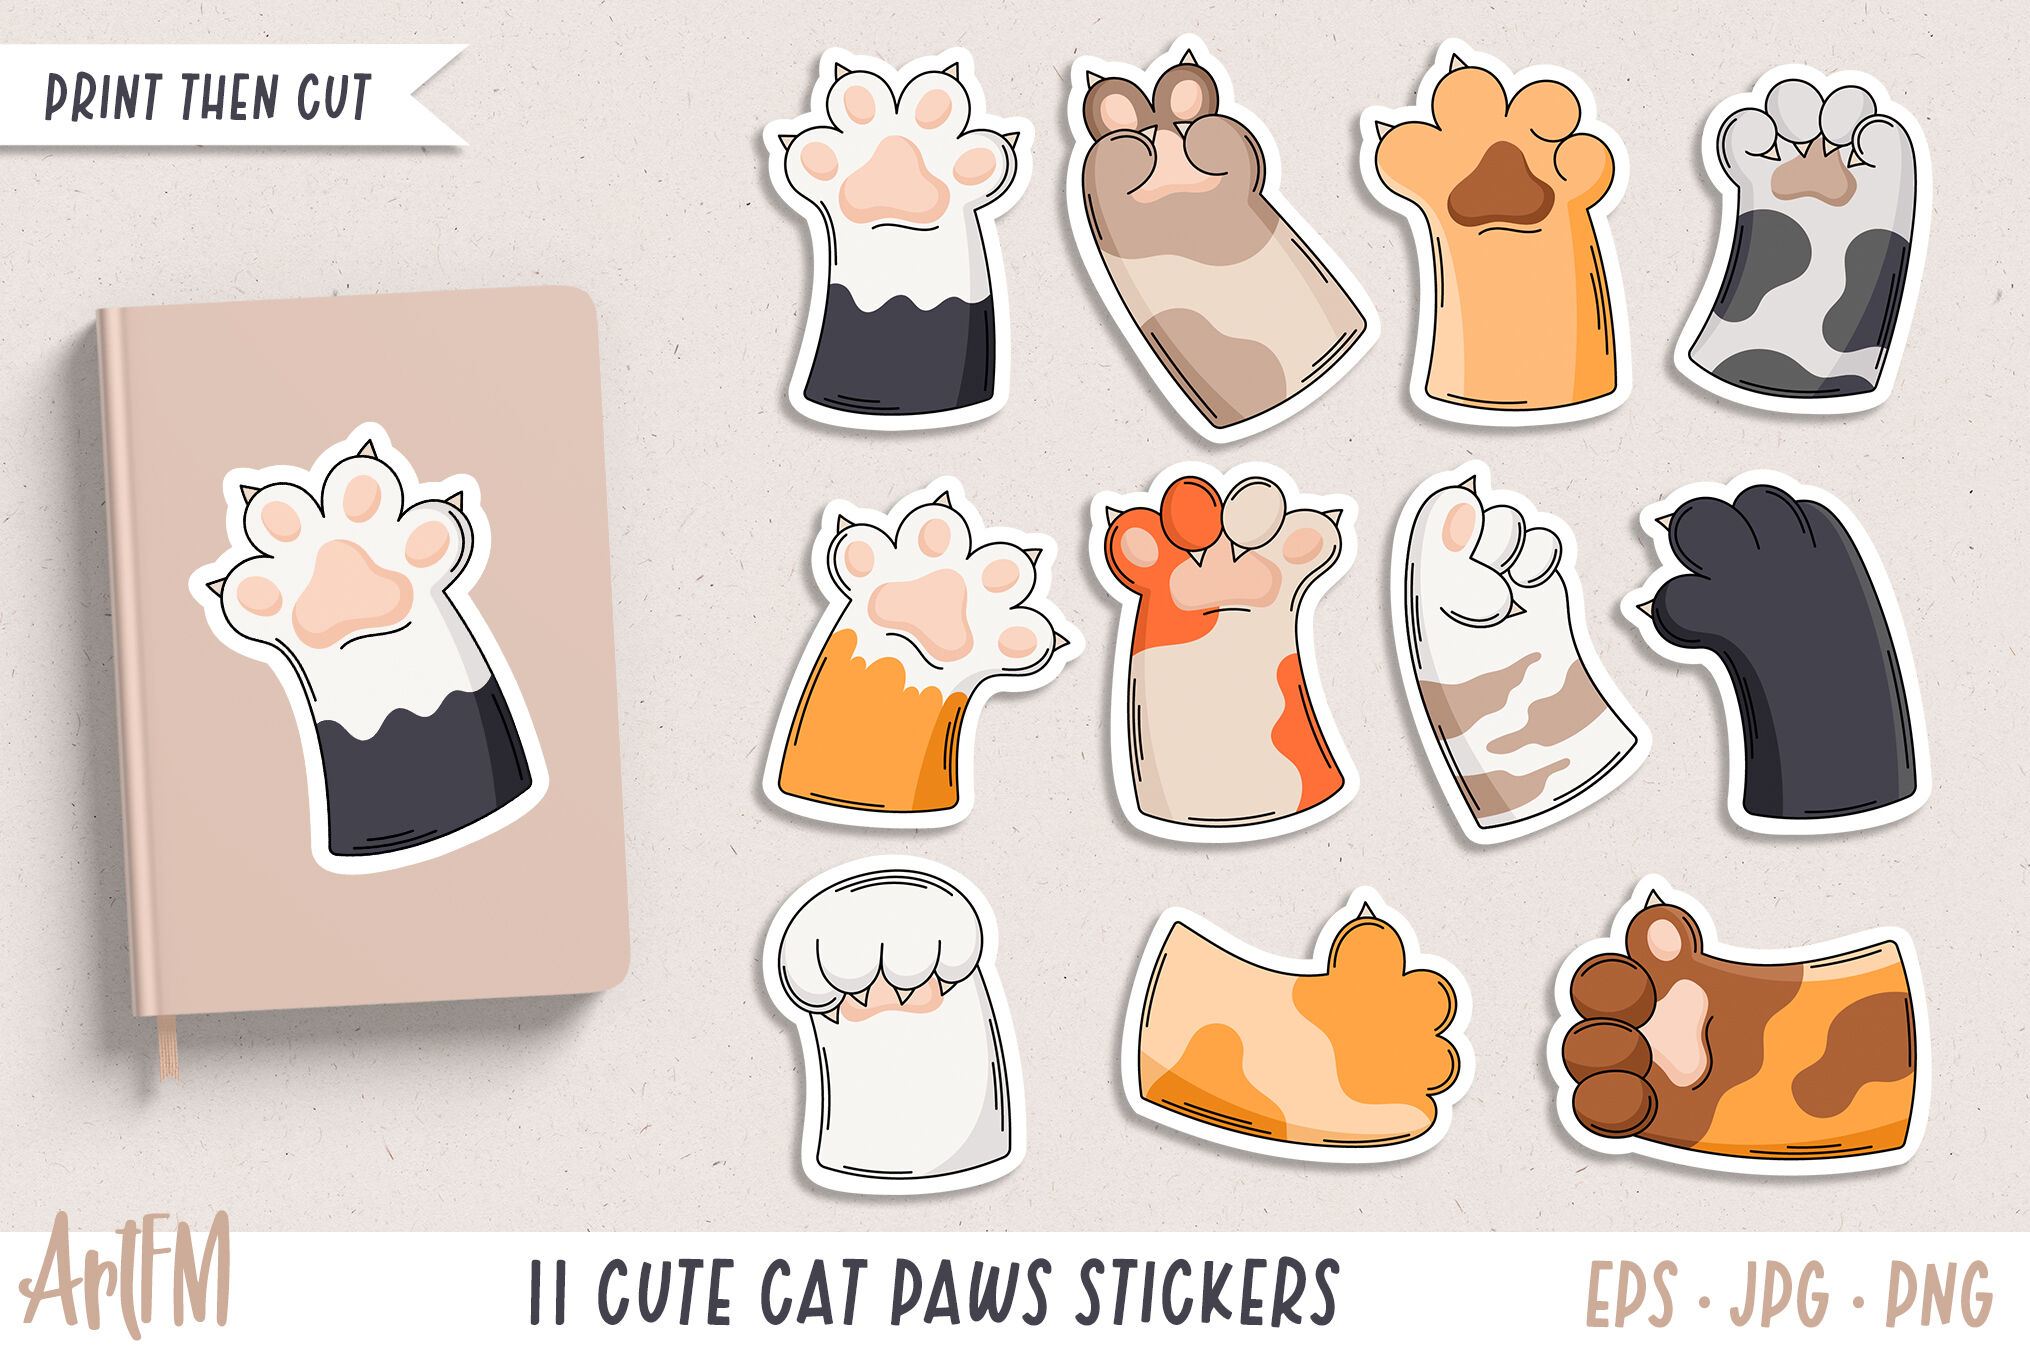 Cute Cat Paws Stickers, Cat Paw Gestures PNG, Animal Paws By ArtFM